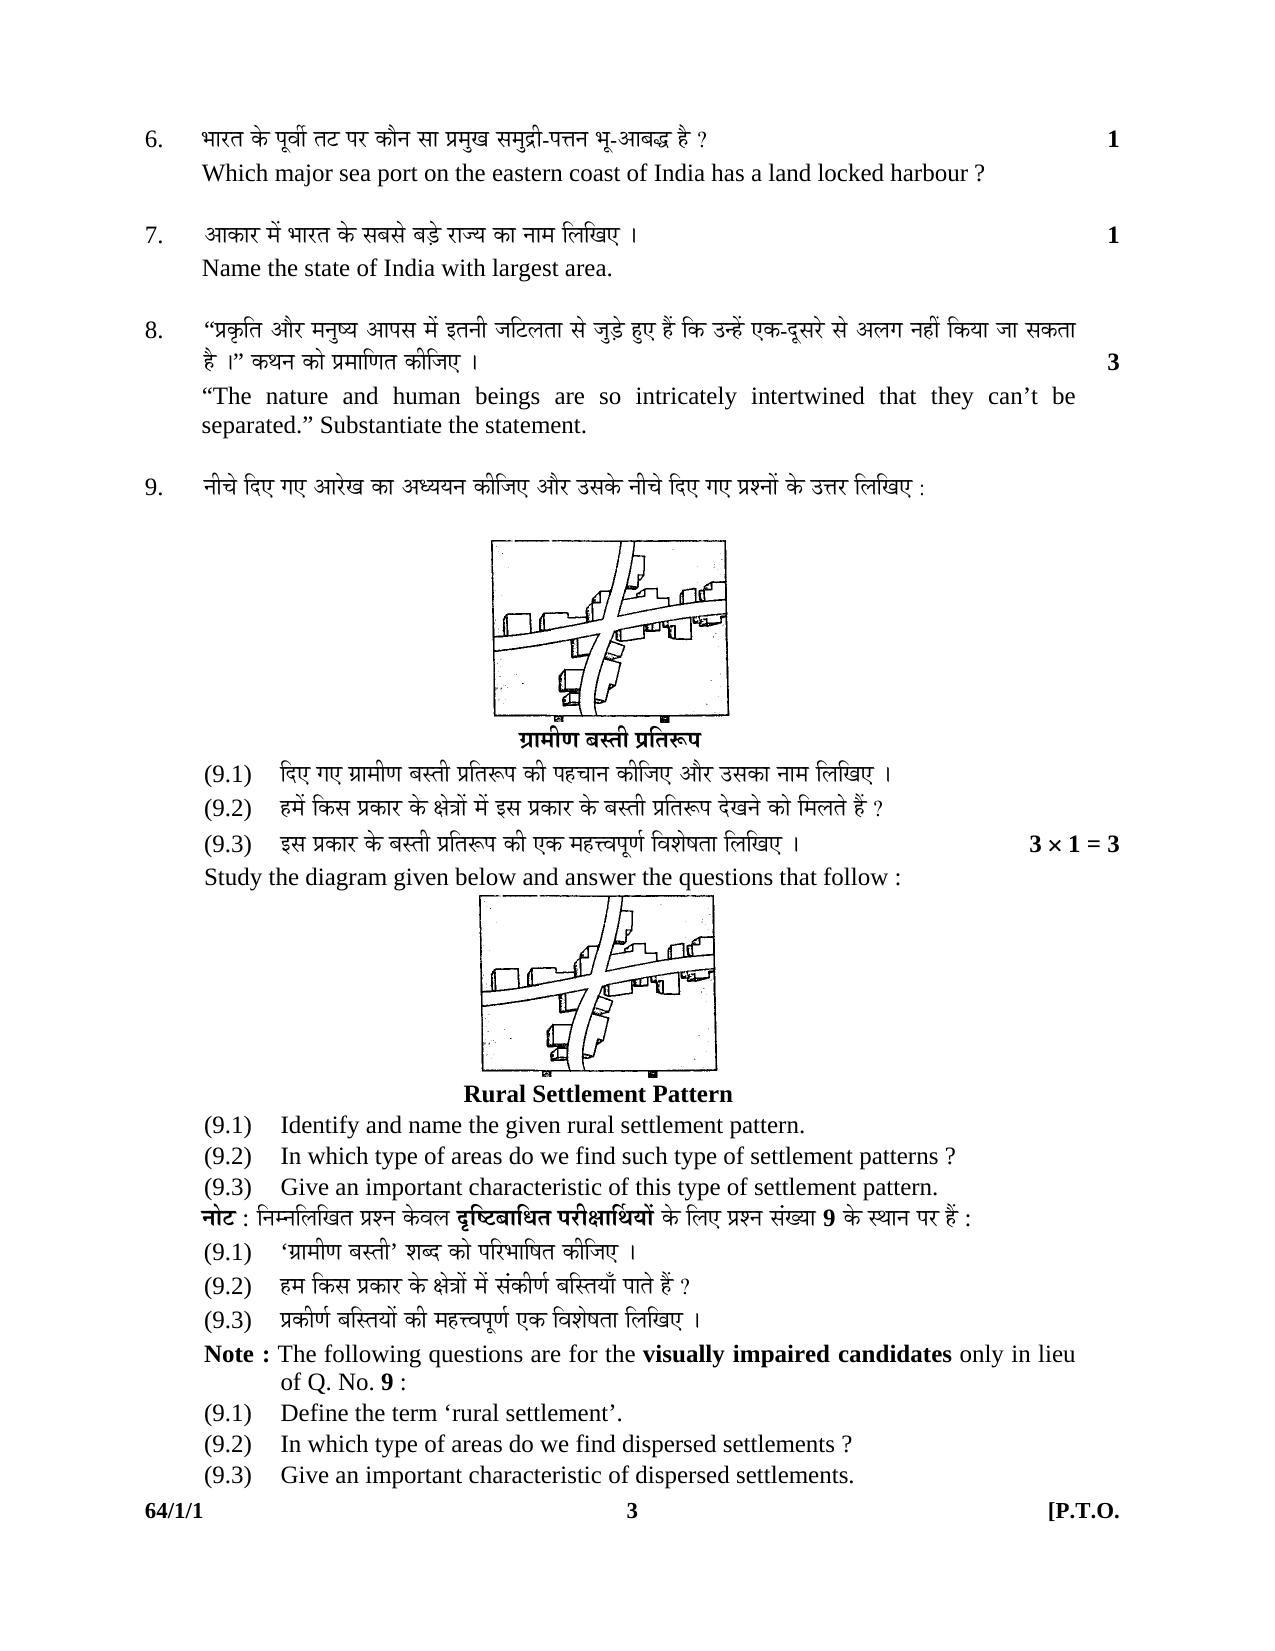 CBSE Class 12 64-1-1 GEOGRAPHY 2016 Question Paper - Page 3